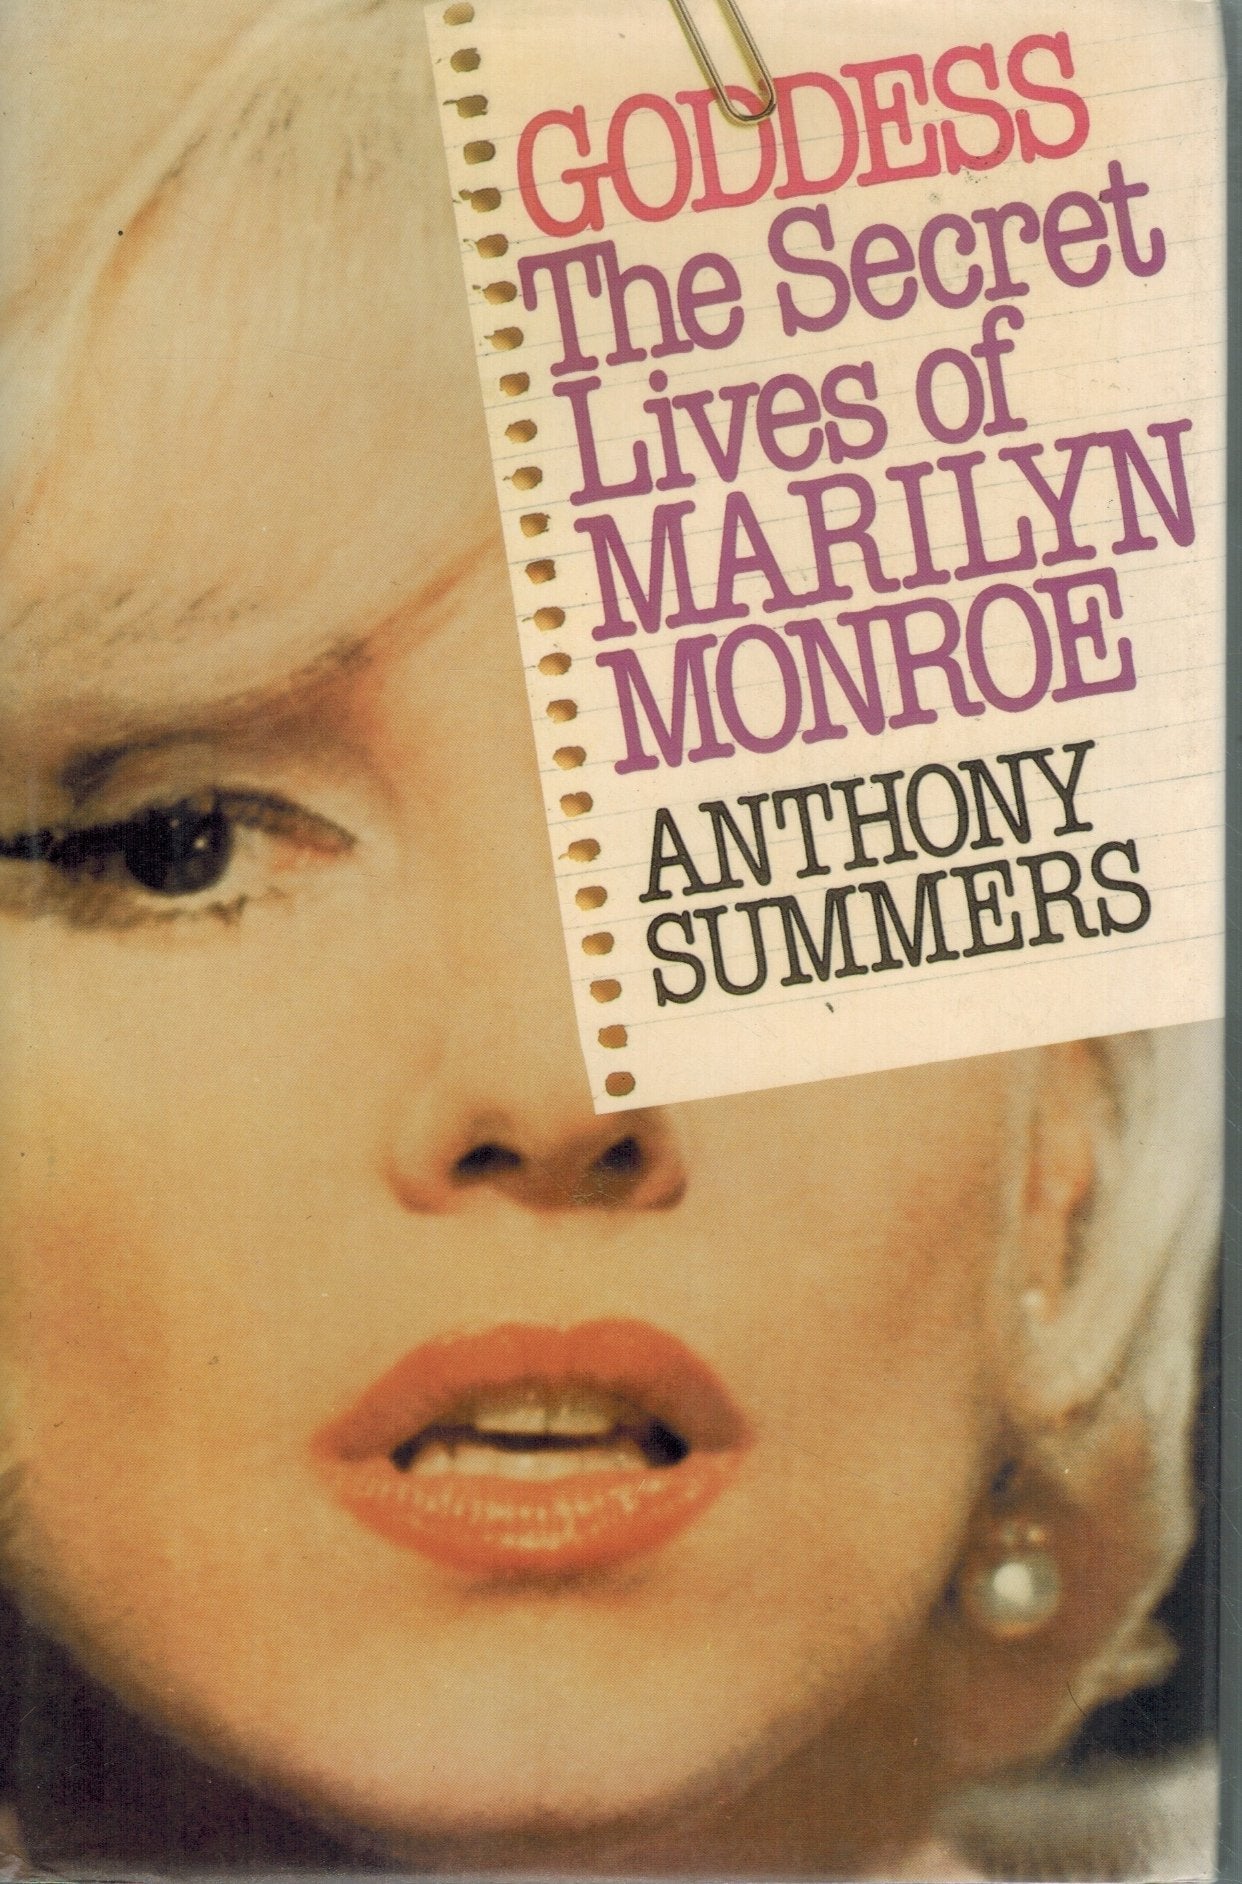 GODDESS The Secret Lives of Marilyn Monroe  by Summers, Anthony